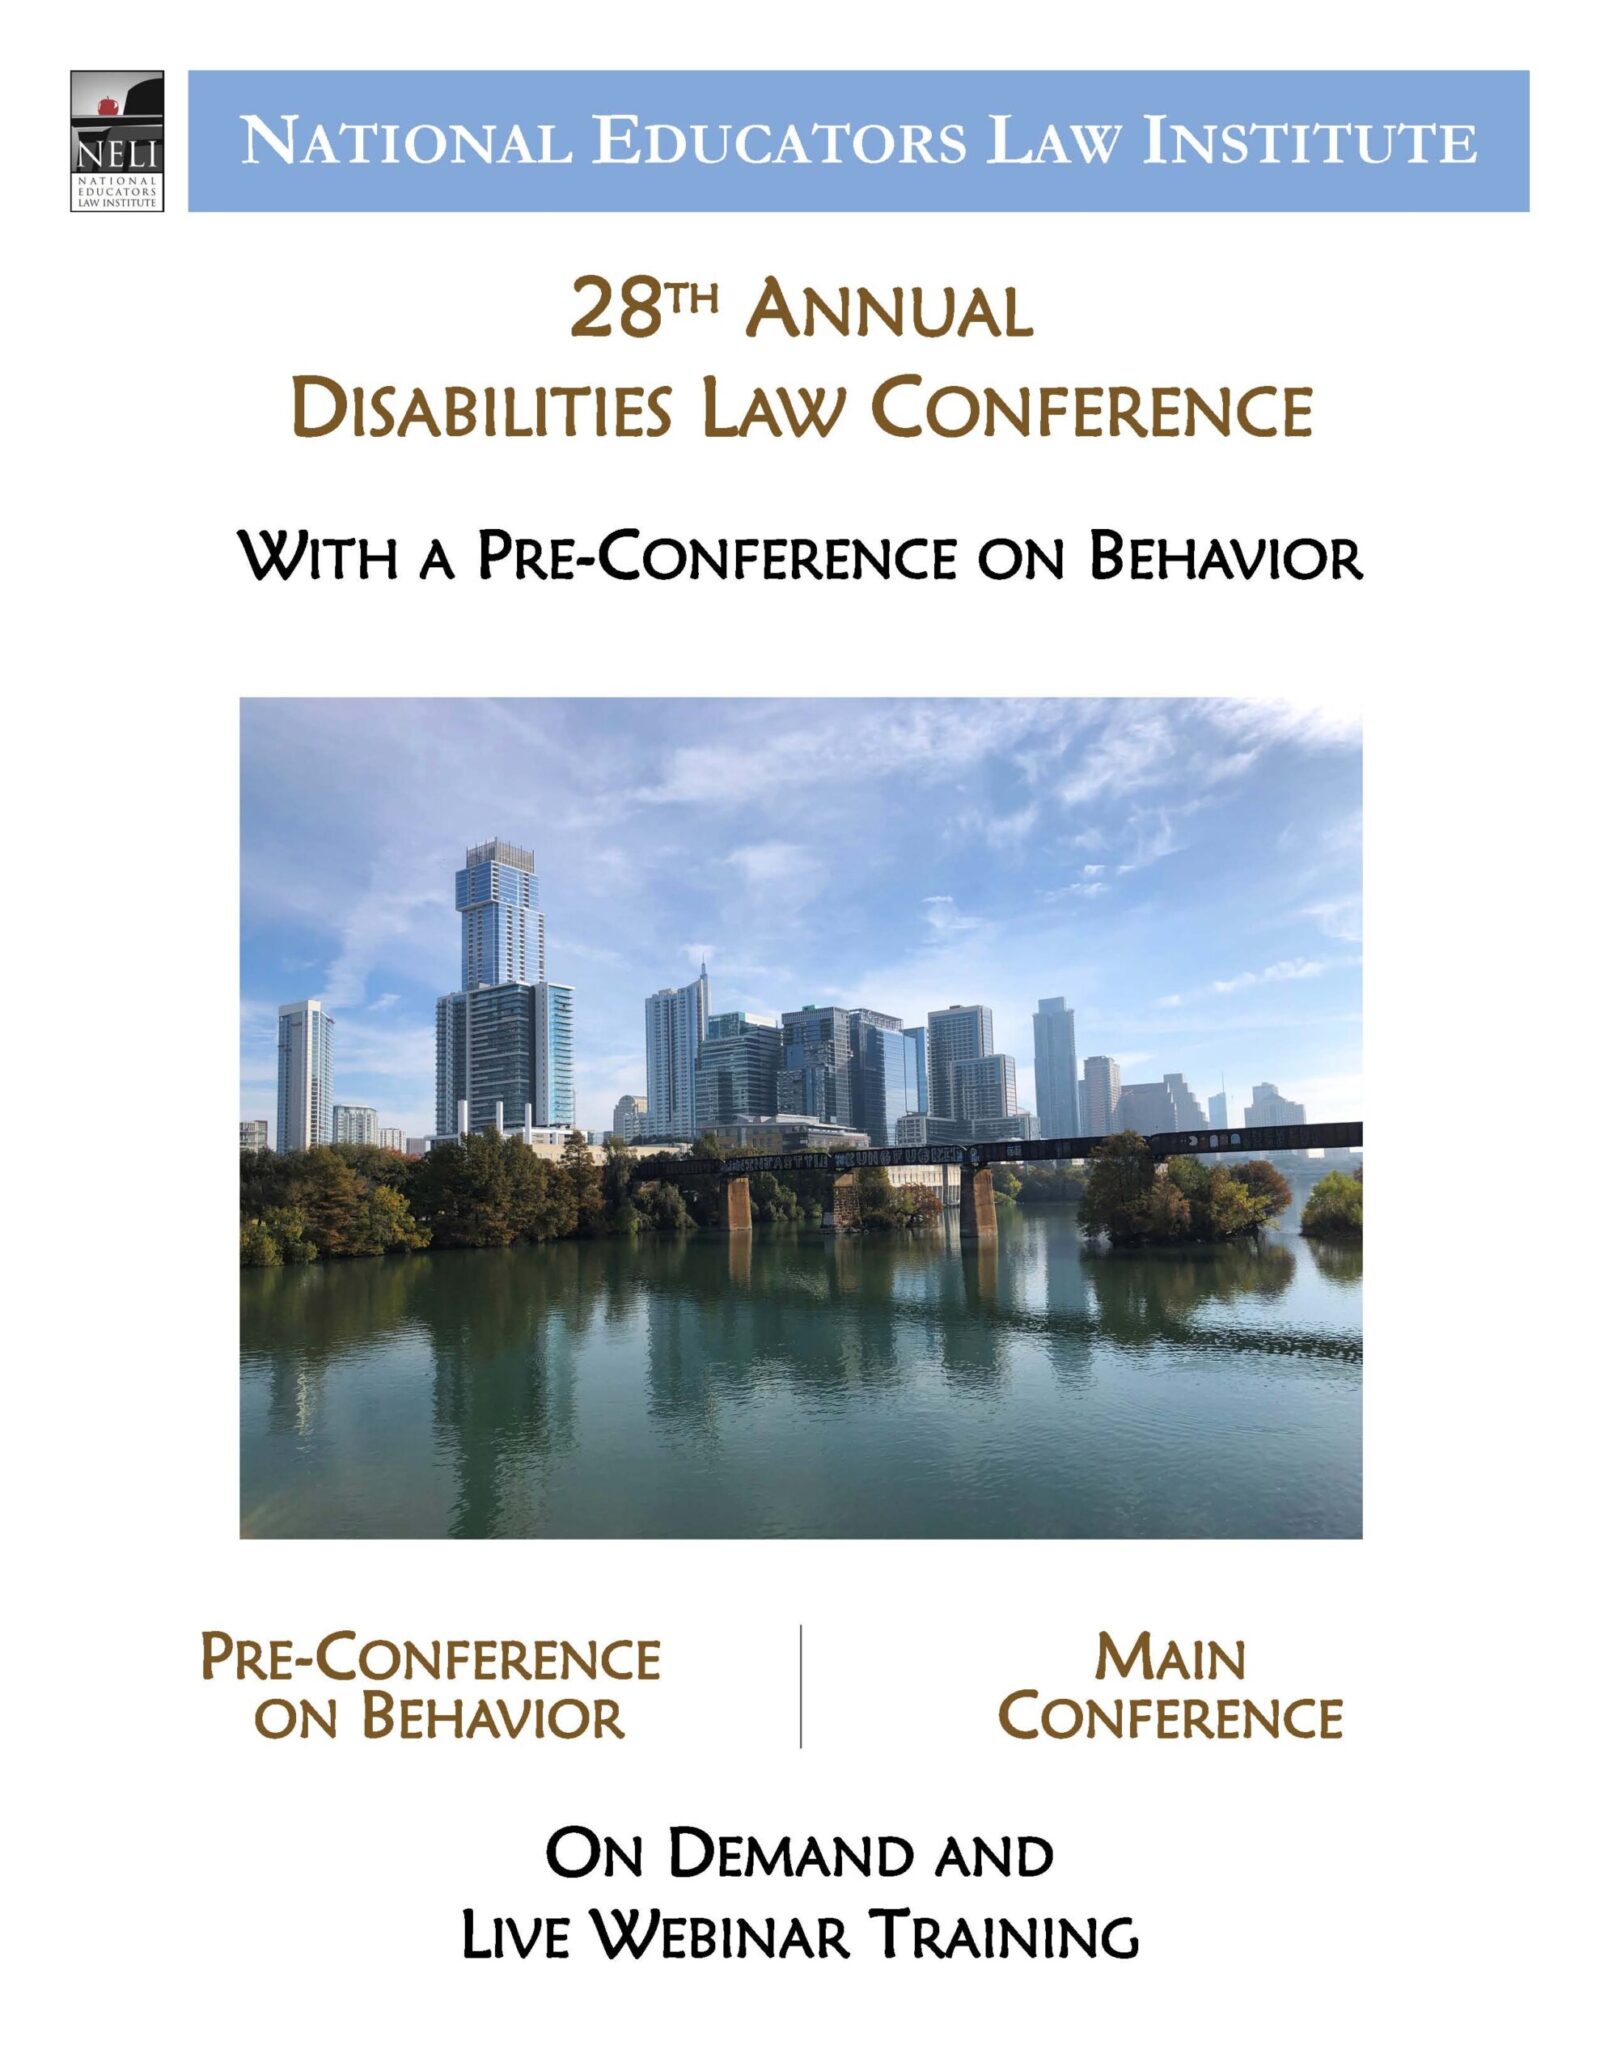 28th Annual Disabilities Law Conference - Main Conference